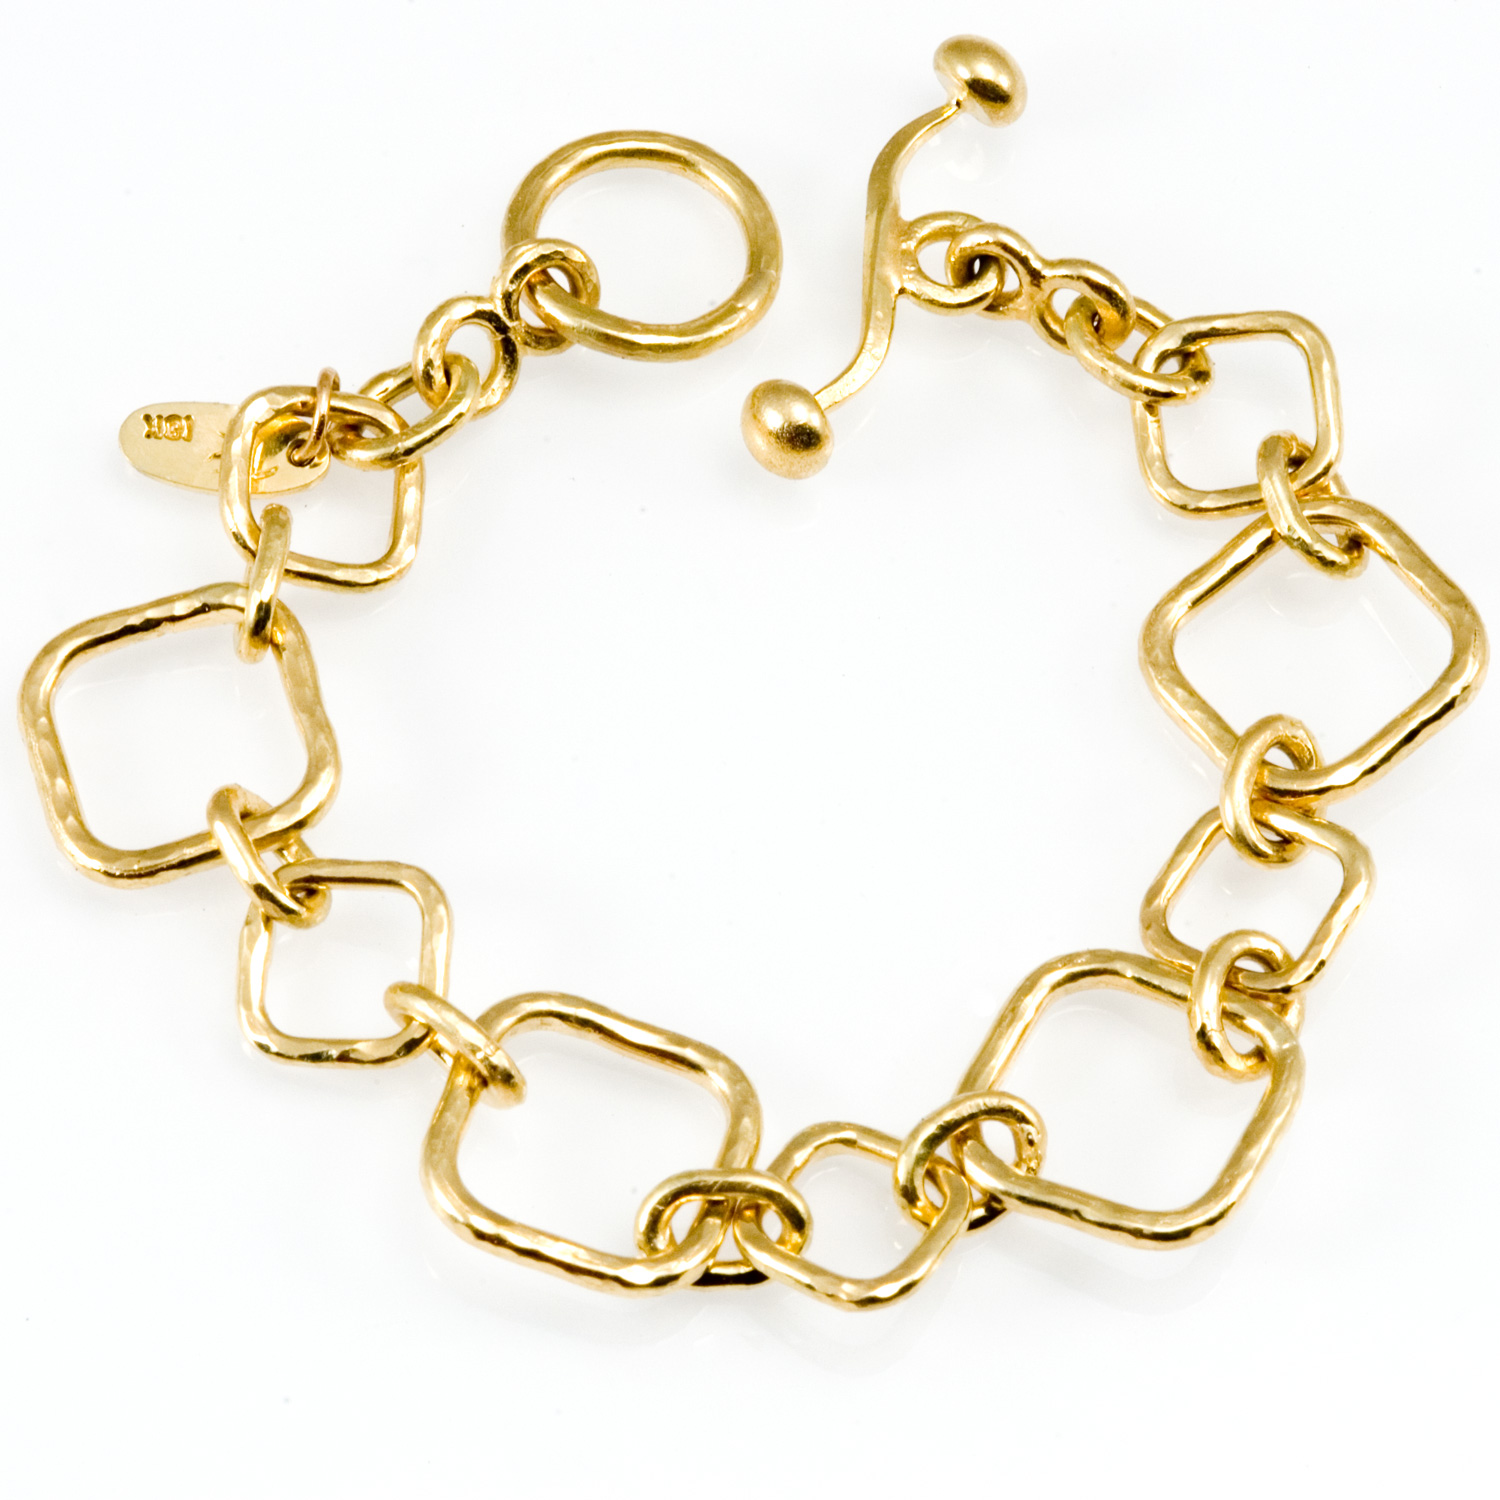 Forged Square Link Bracelet by Tamberlaine